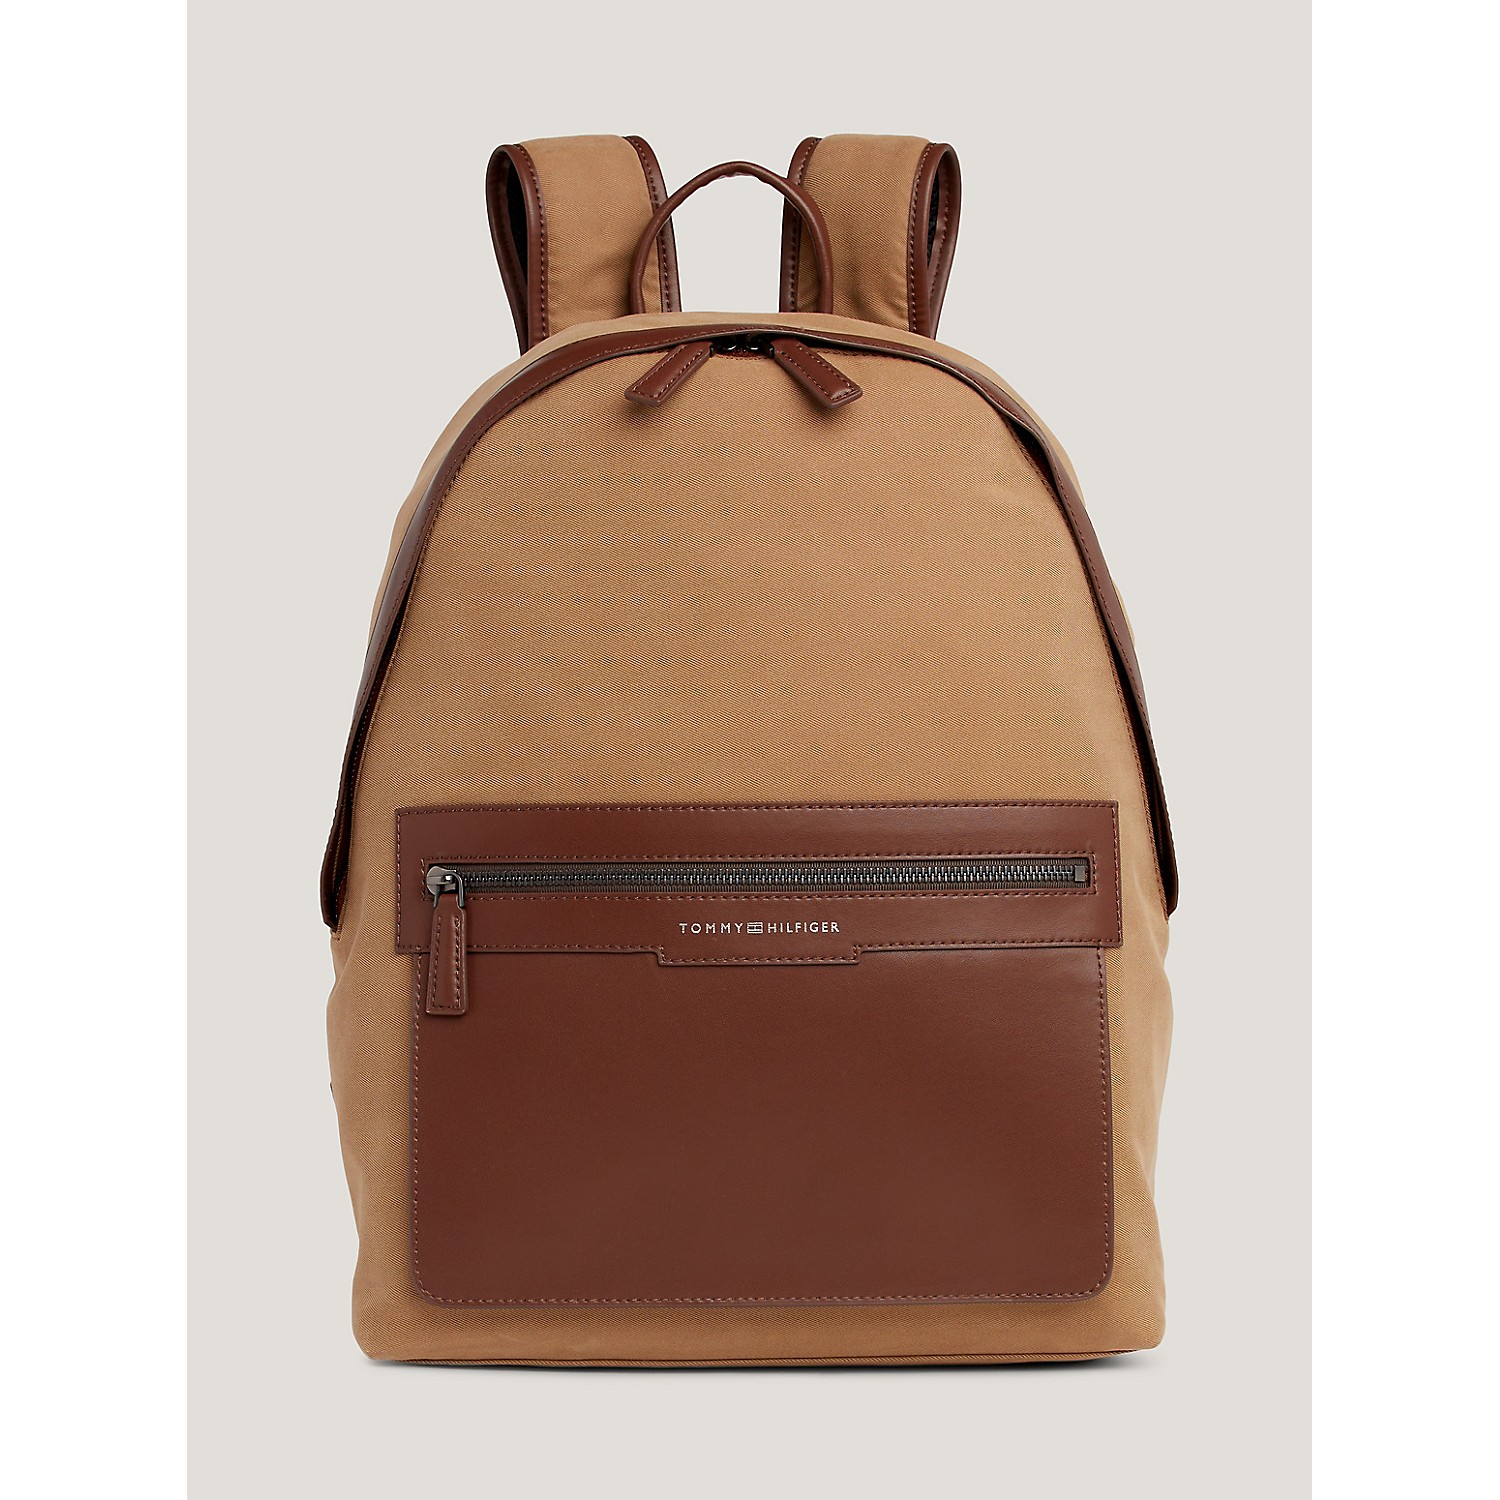 TOMMY HILFIGER Leather Trim Dome Backpack